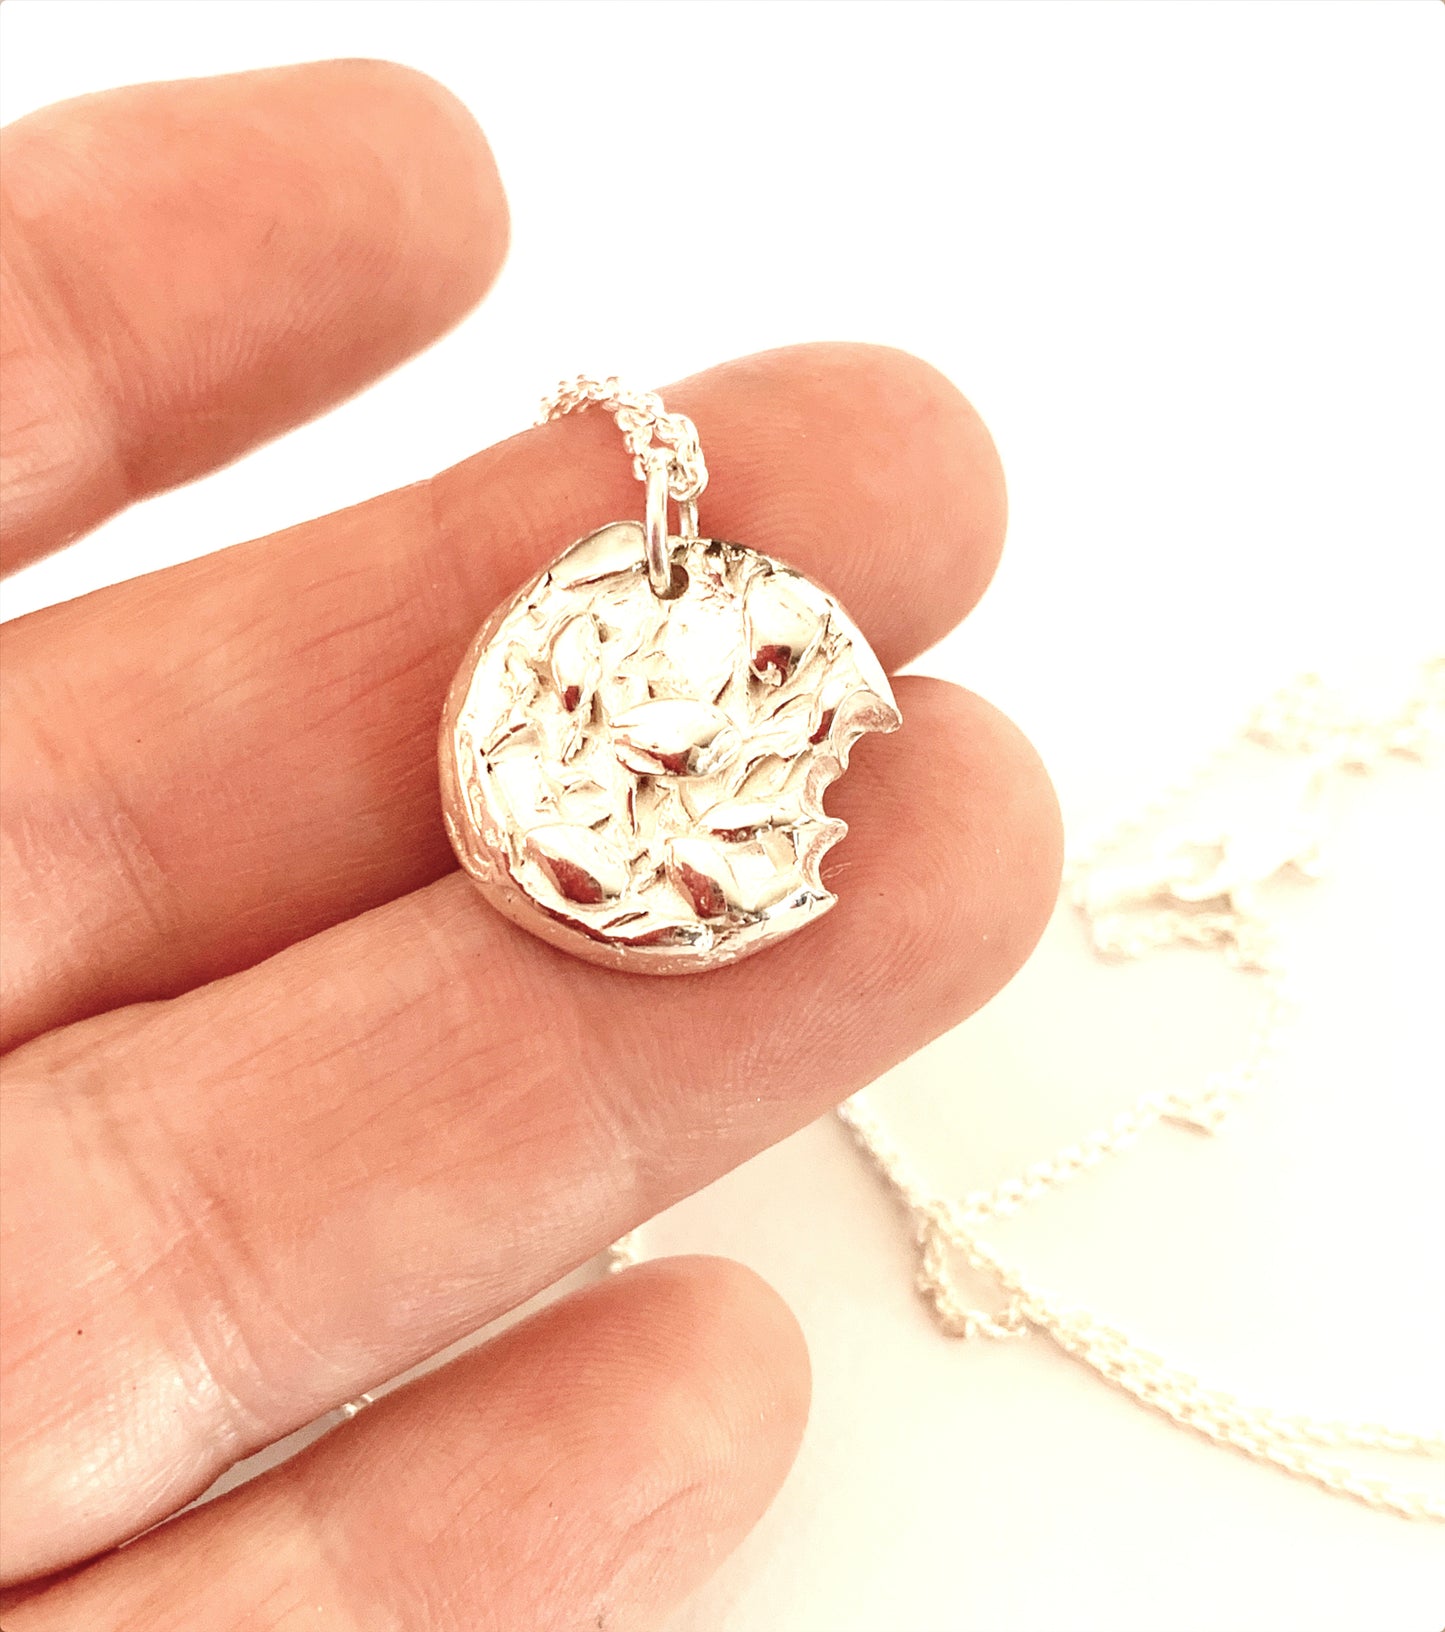 Oatmeal Cookie Pendant Necklace in Sterling Silver